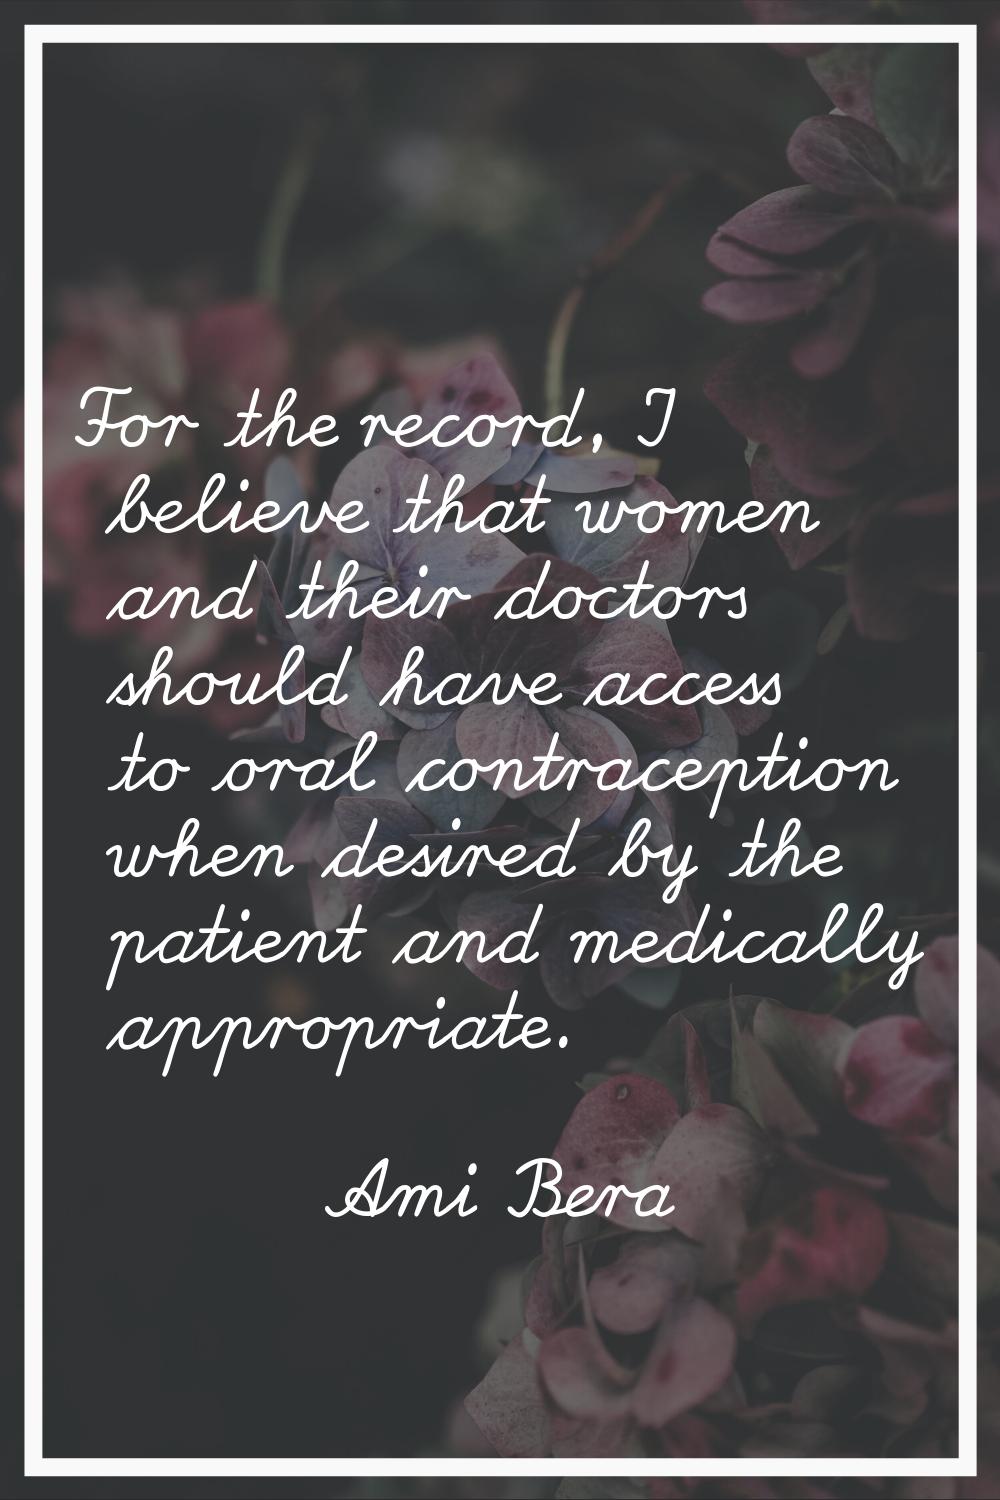 For the record, I believe that women and their doctors should have access to oral contraception whe